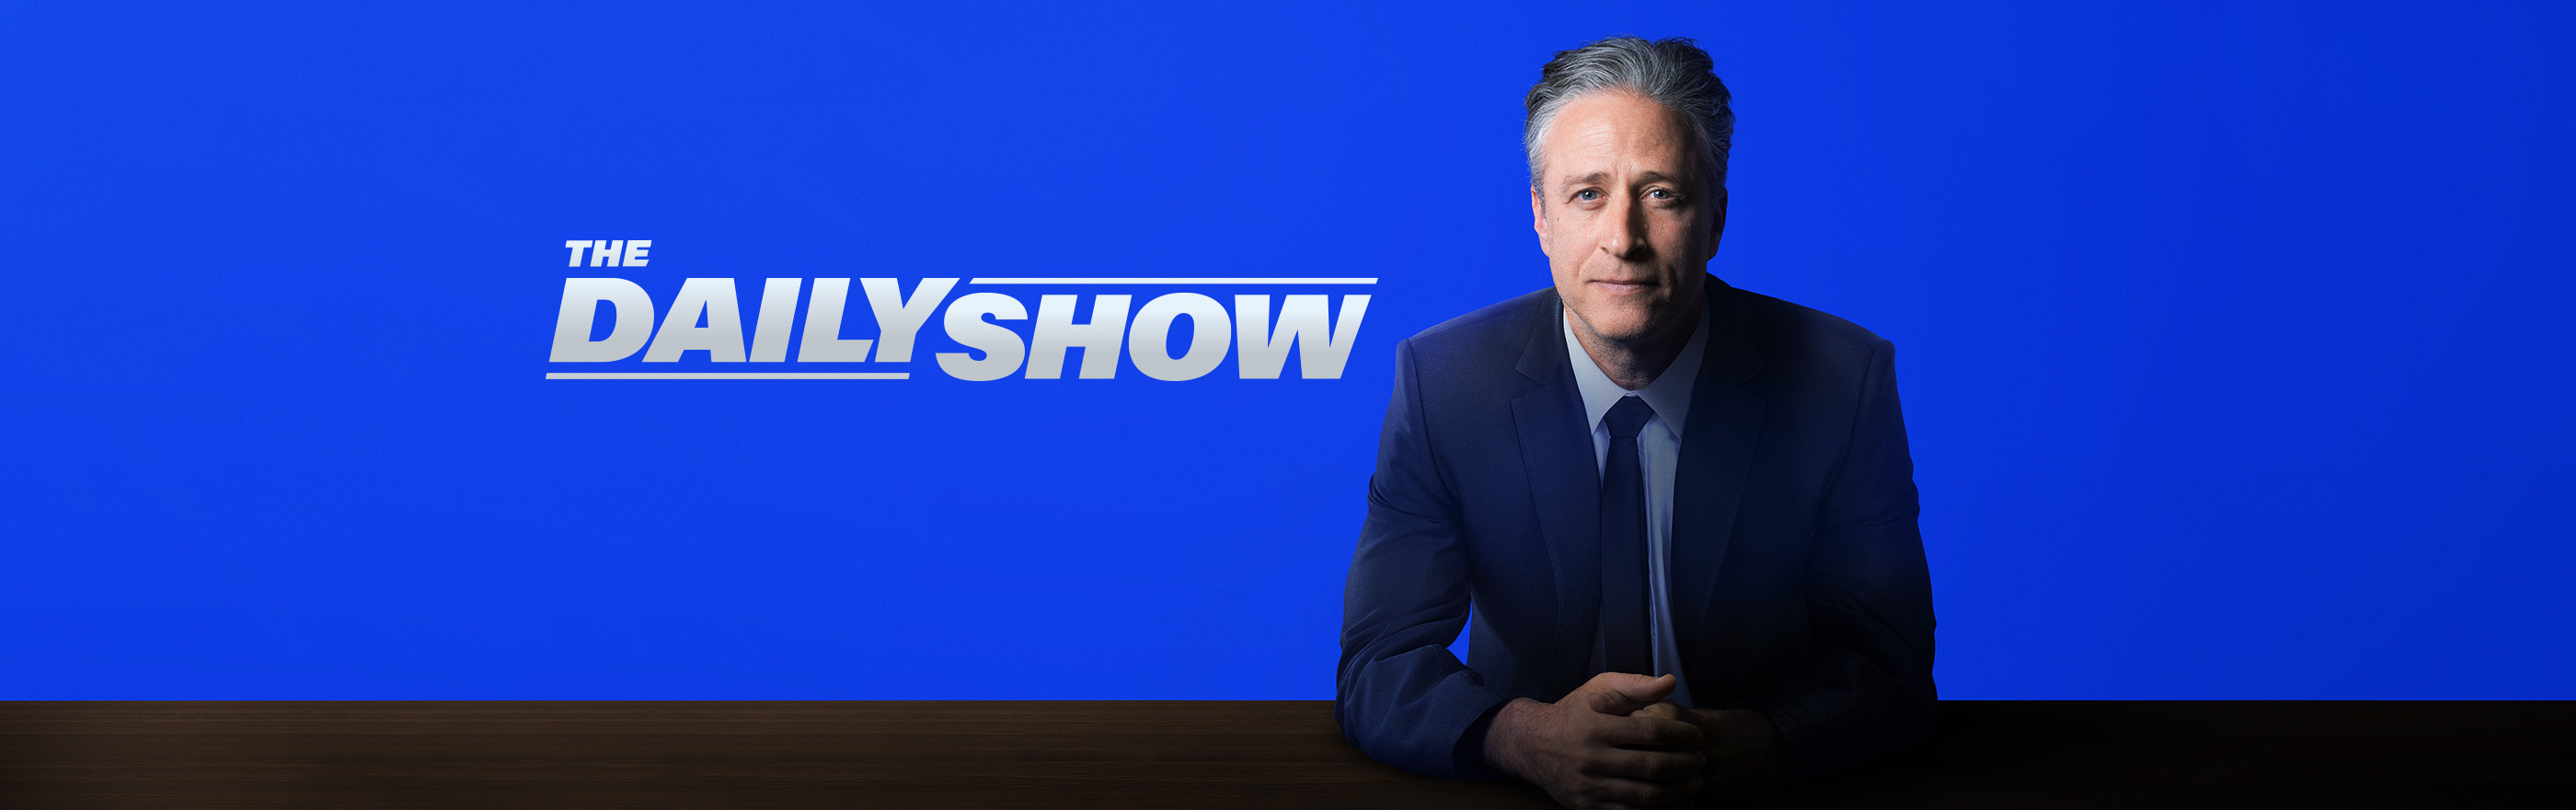 The Daily Show LOGO